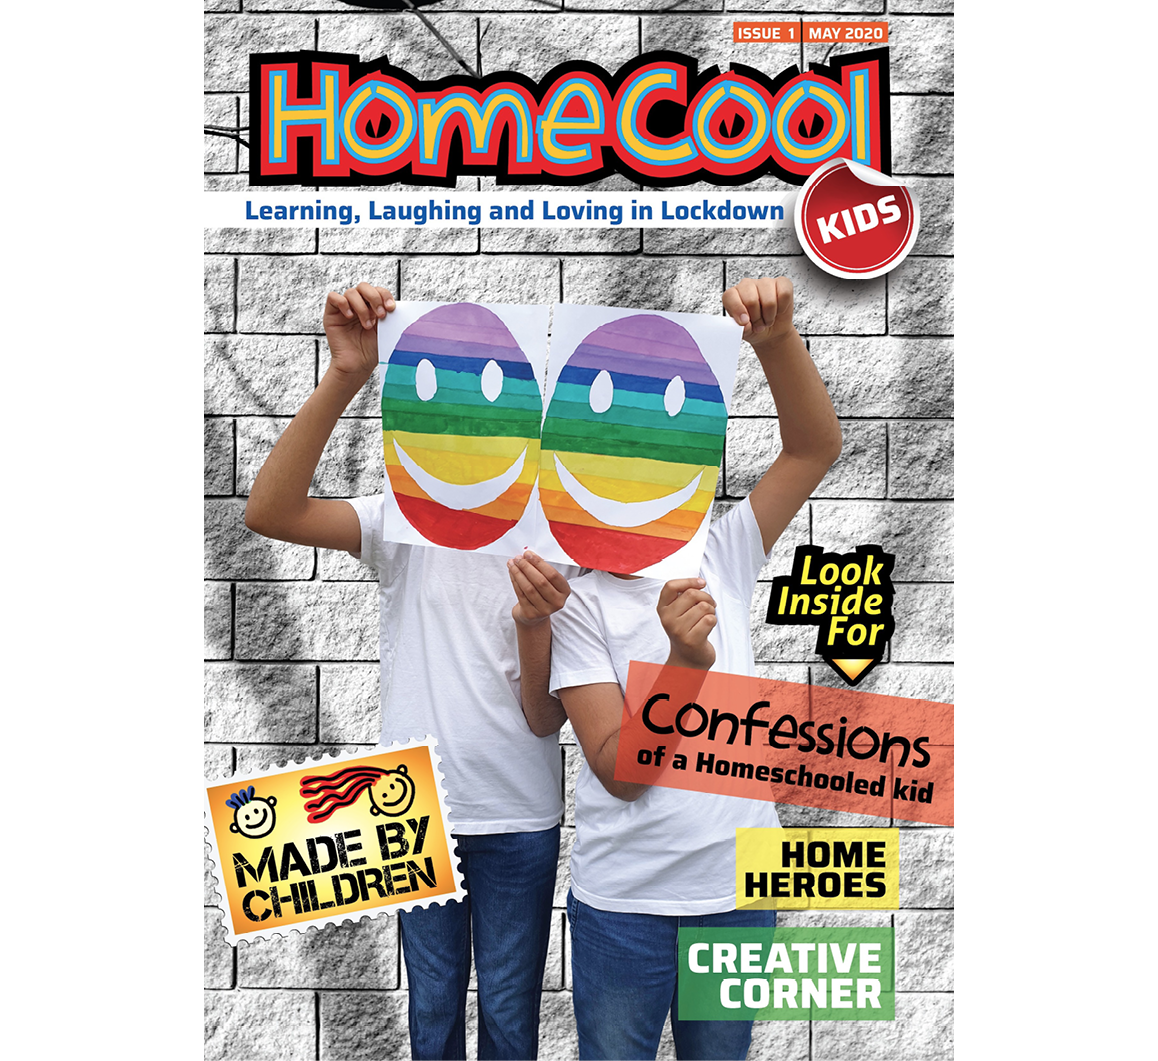 Cover of HomeCool magazine cover with two children holding rainbow smiley faces over their faces, and text blocks highlighting features inside, 'Confessions of a Homeschooled Kid', 'Home Heroes', and 'Creative Corner'